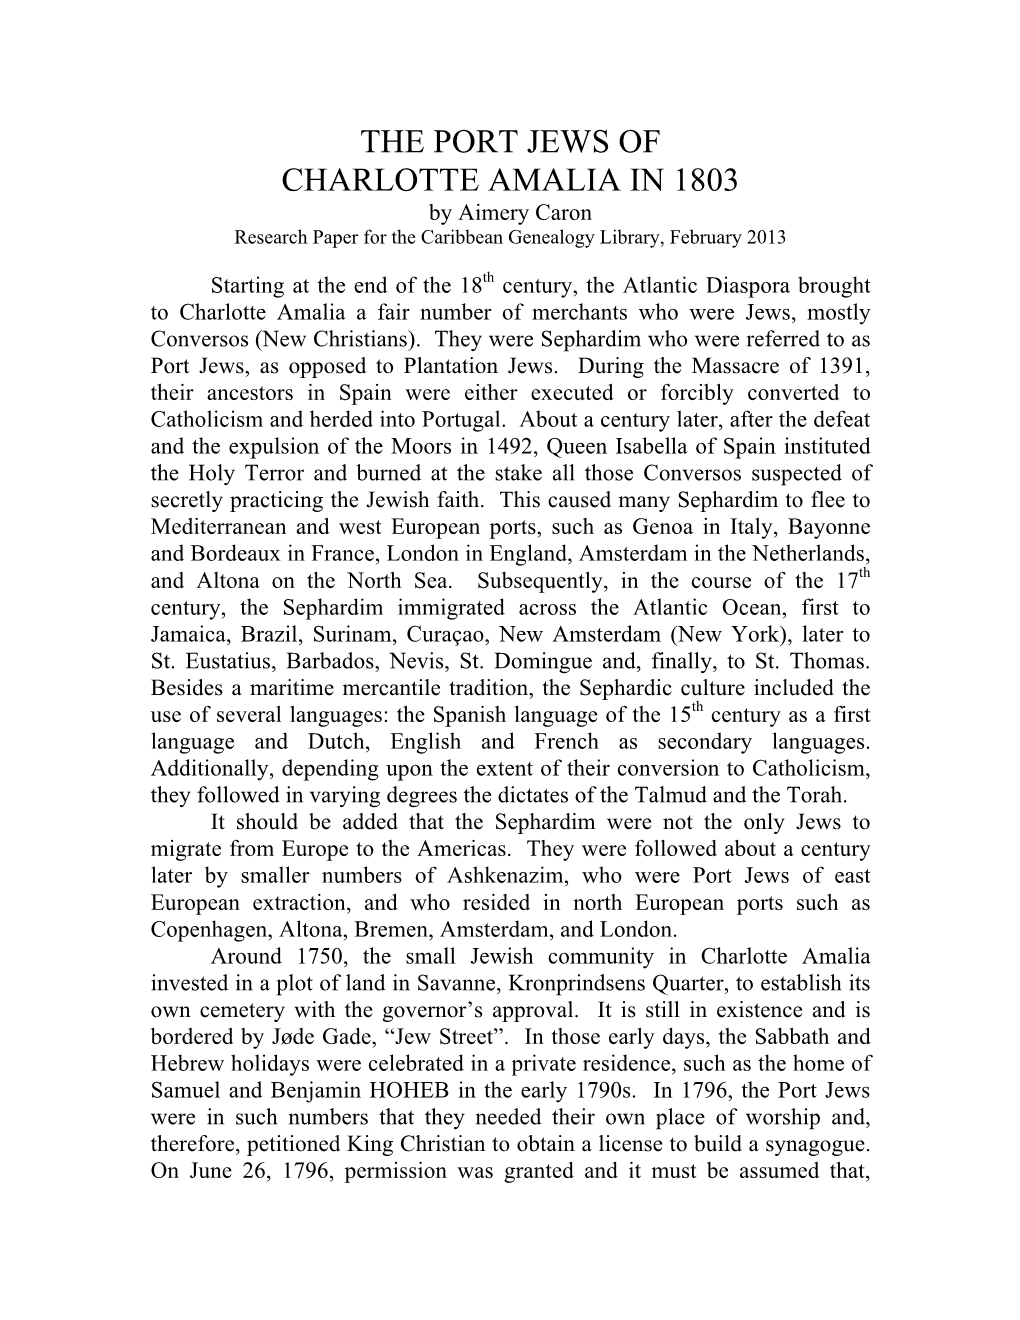 THE PORT JEWS of CHARLOTTE AMALIA in 1803 by Aimery Caron Research Paper for the Caribbean Genealogy Library, February 2013